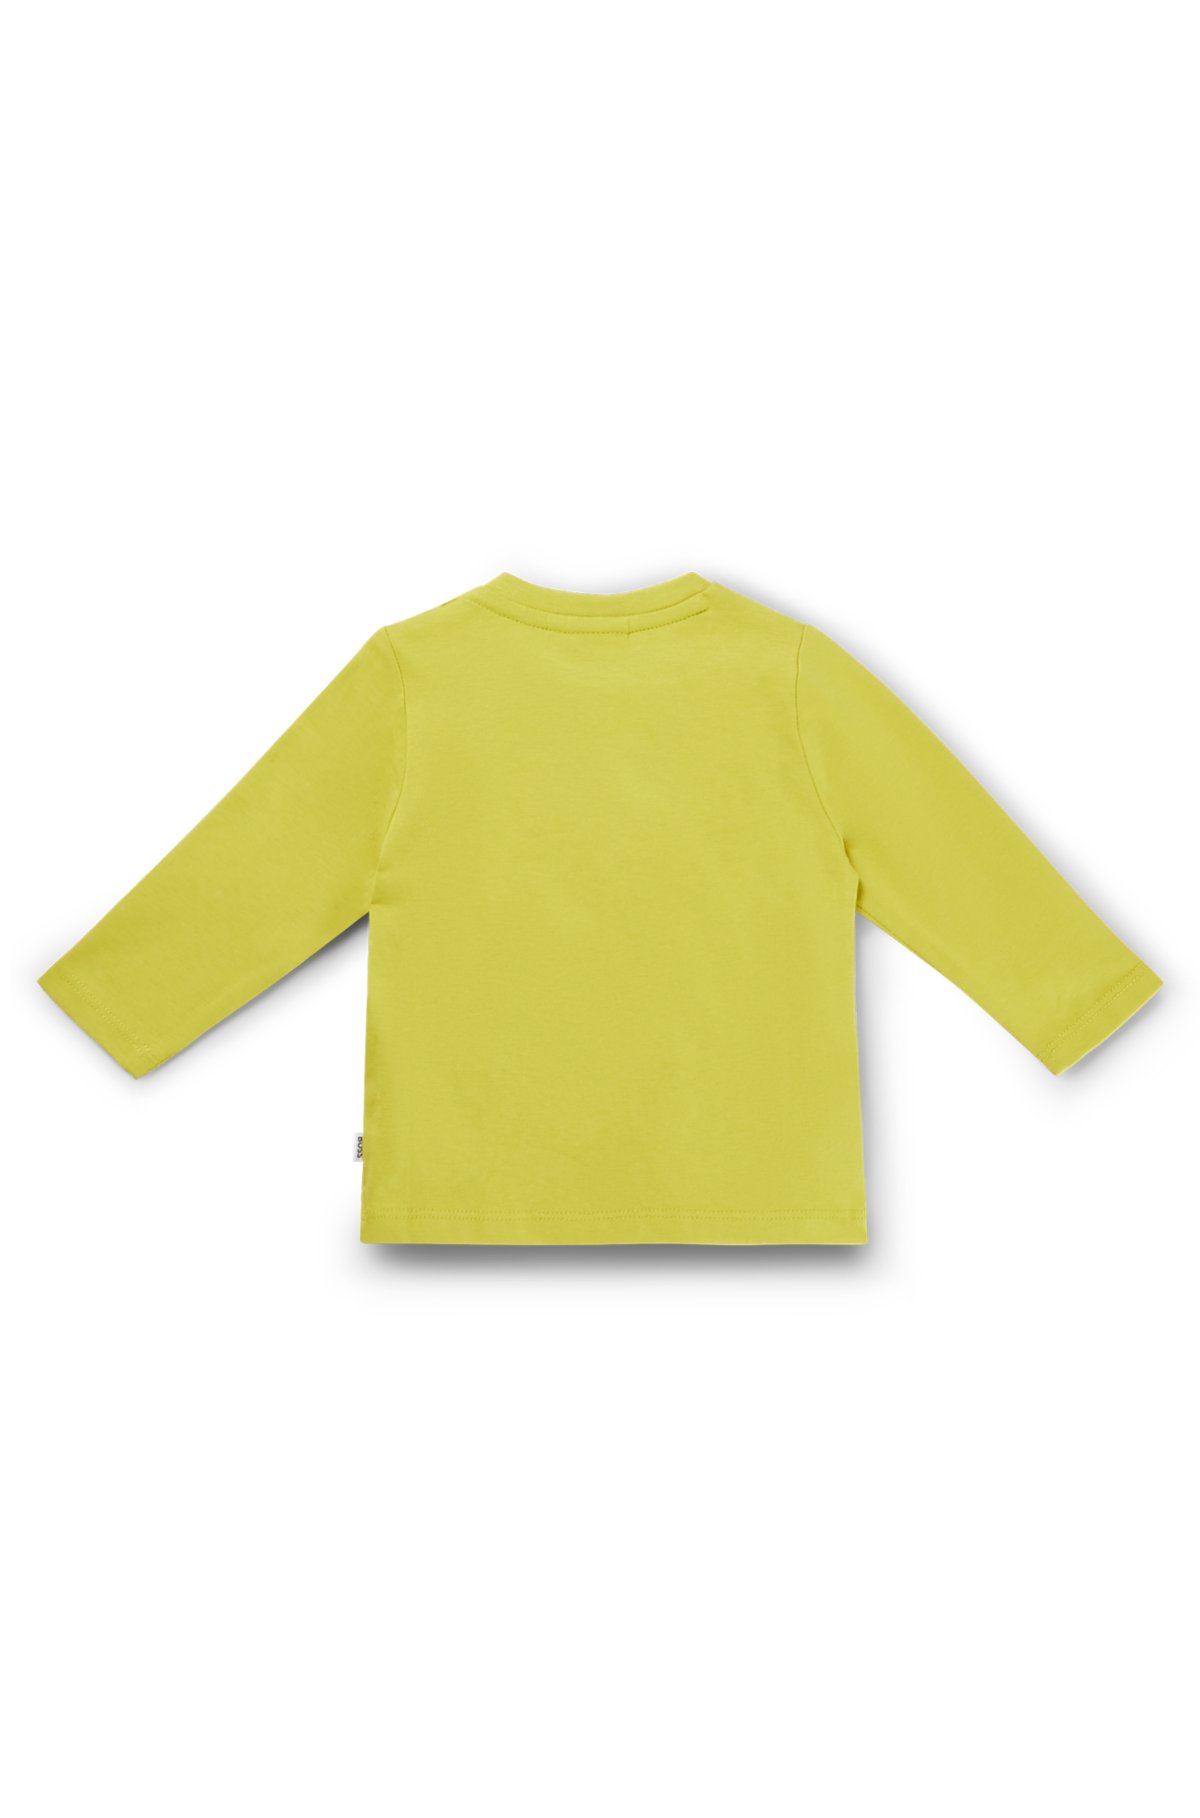 Kids' long-sleeved T-shirt in cotton with logo artwork, Green